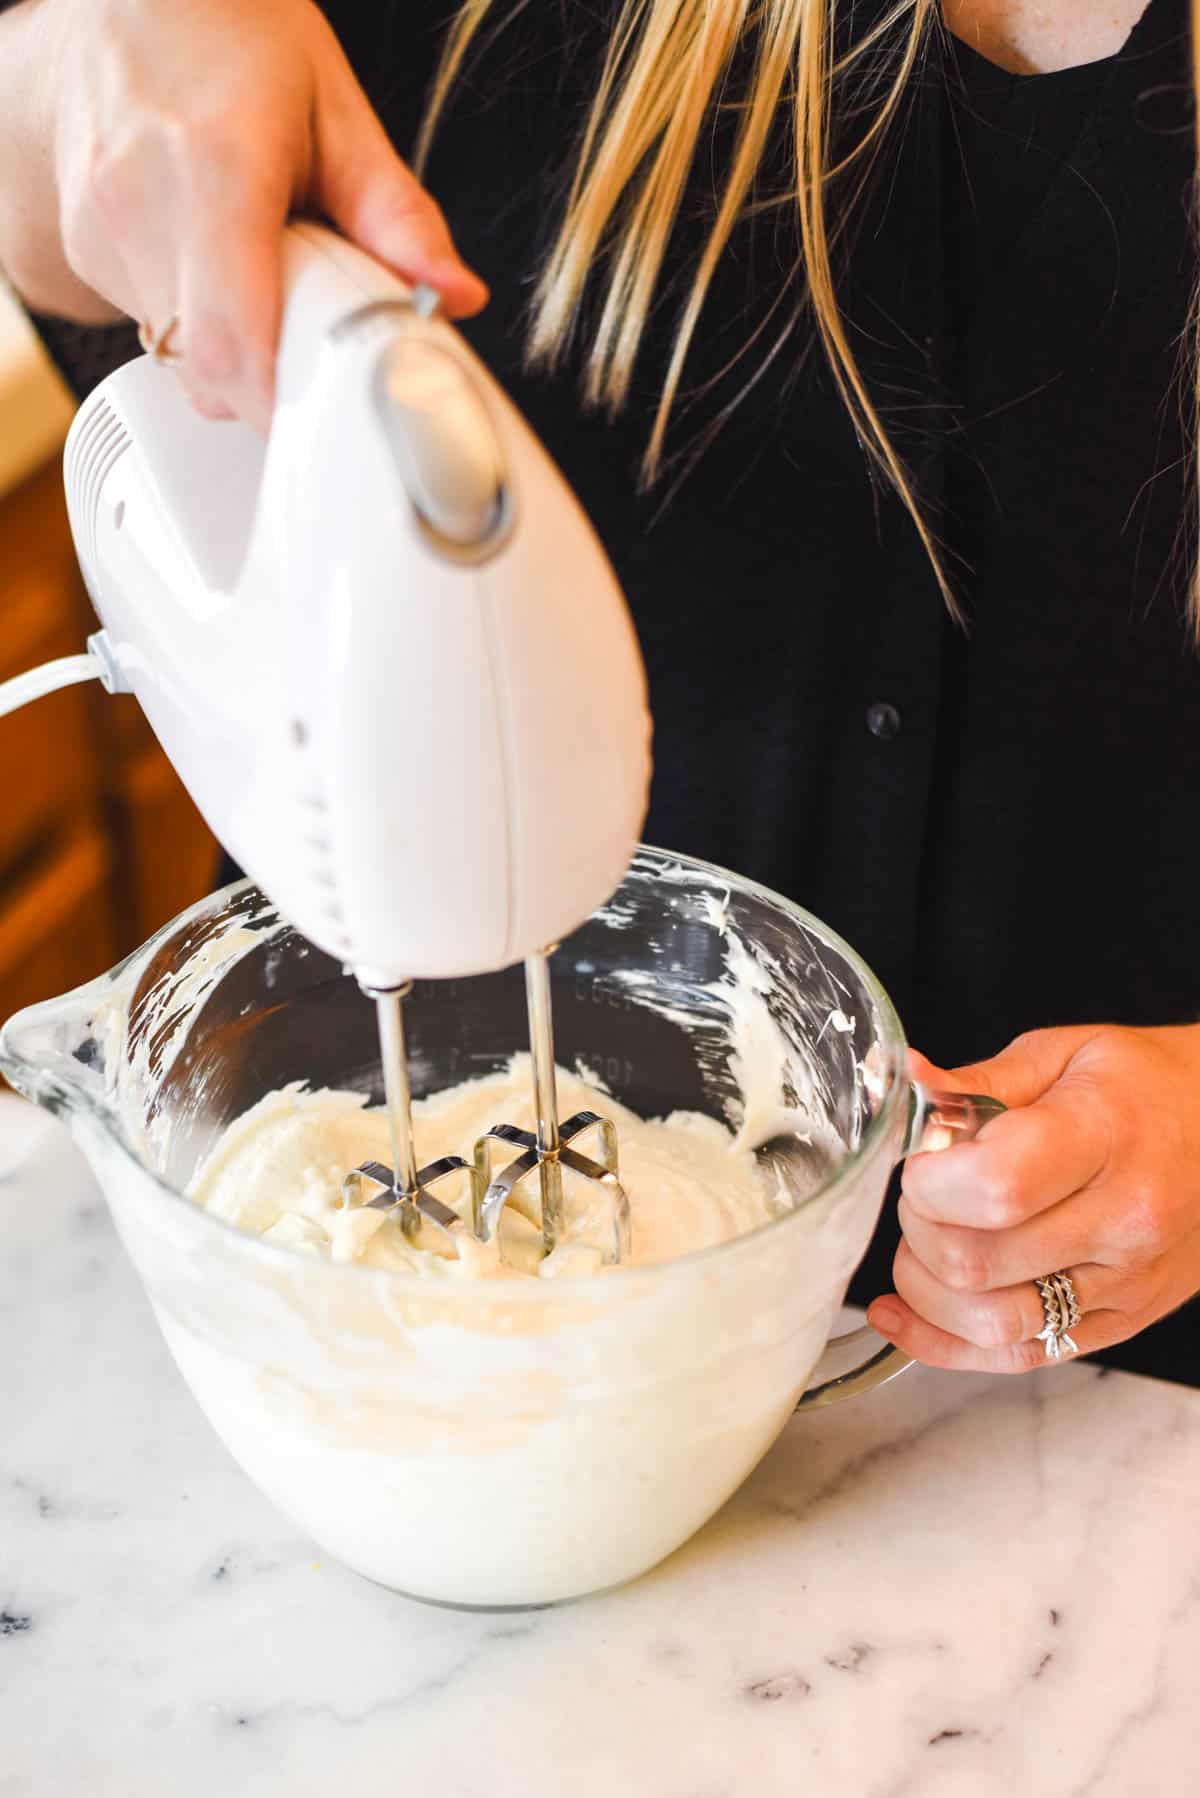 Woman using a hand mixer to mix up a cream cheese mixer.